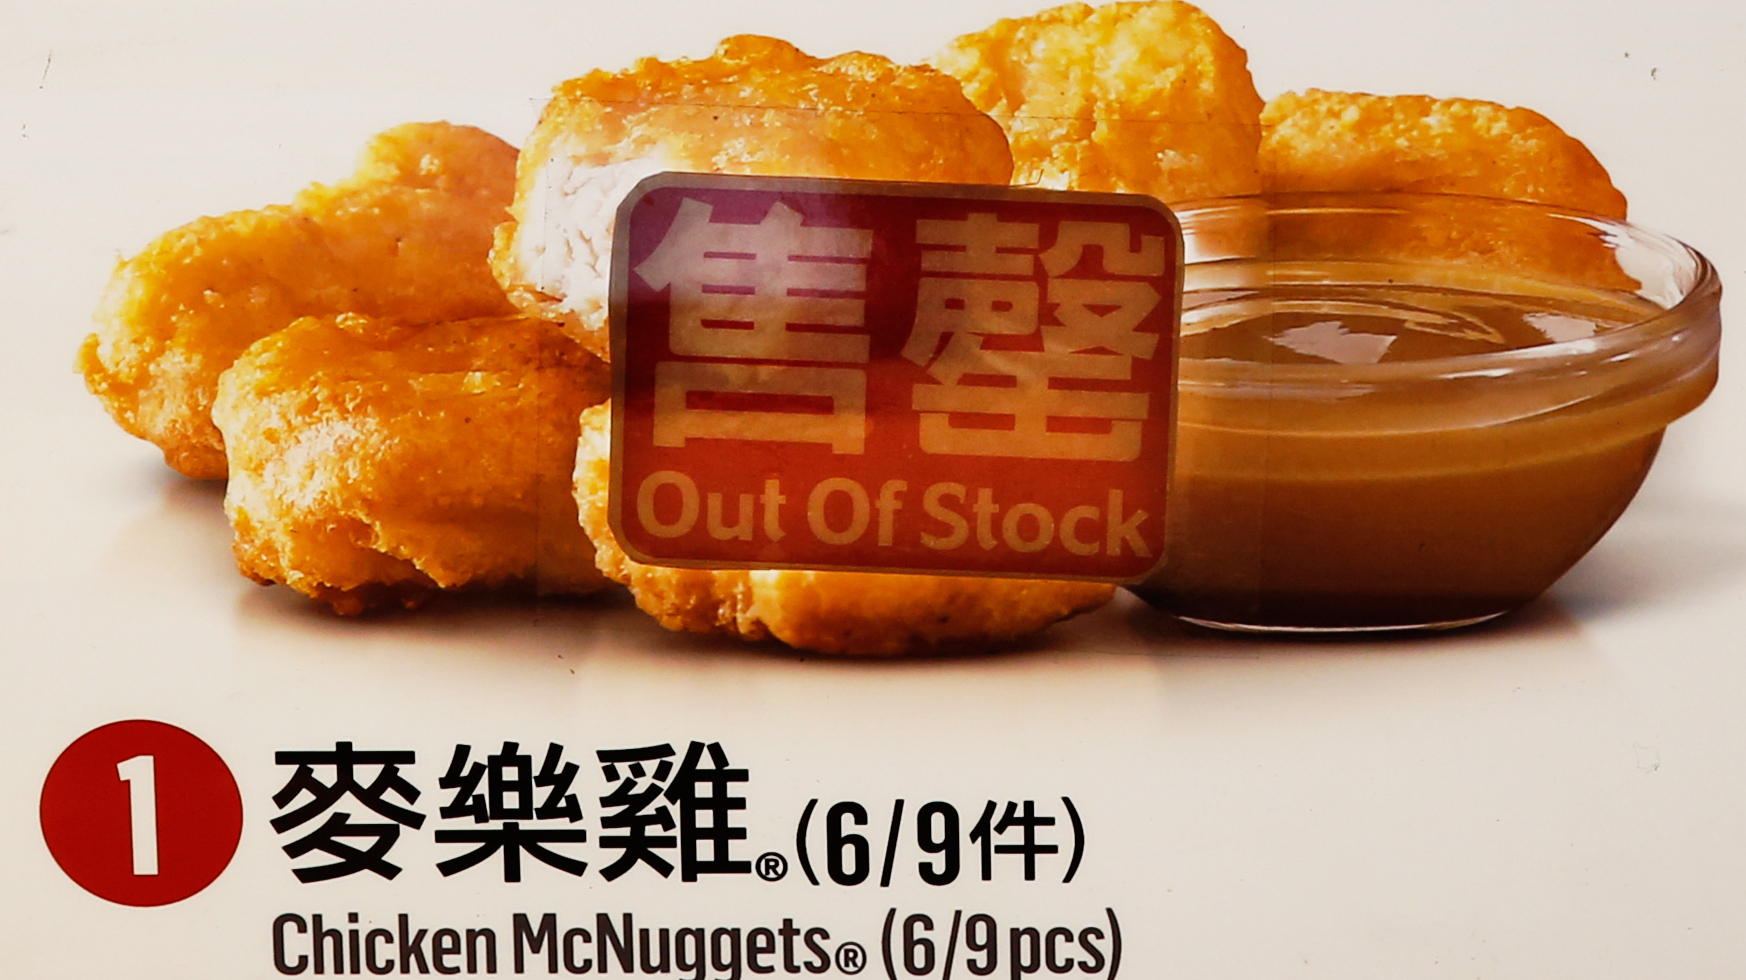 An "Out of Stock" sticker on a menu picture of chicken nuggets at a McDonald's store in Hong Kong on July 25, 2014. A U.S. company that supplies meat to some fast food chains in China has pulled all its products, some of which were chicken nuggets sold in Hong Kong, made by a Chinese subsidiary. Photo: Kin Cheung/AP